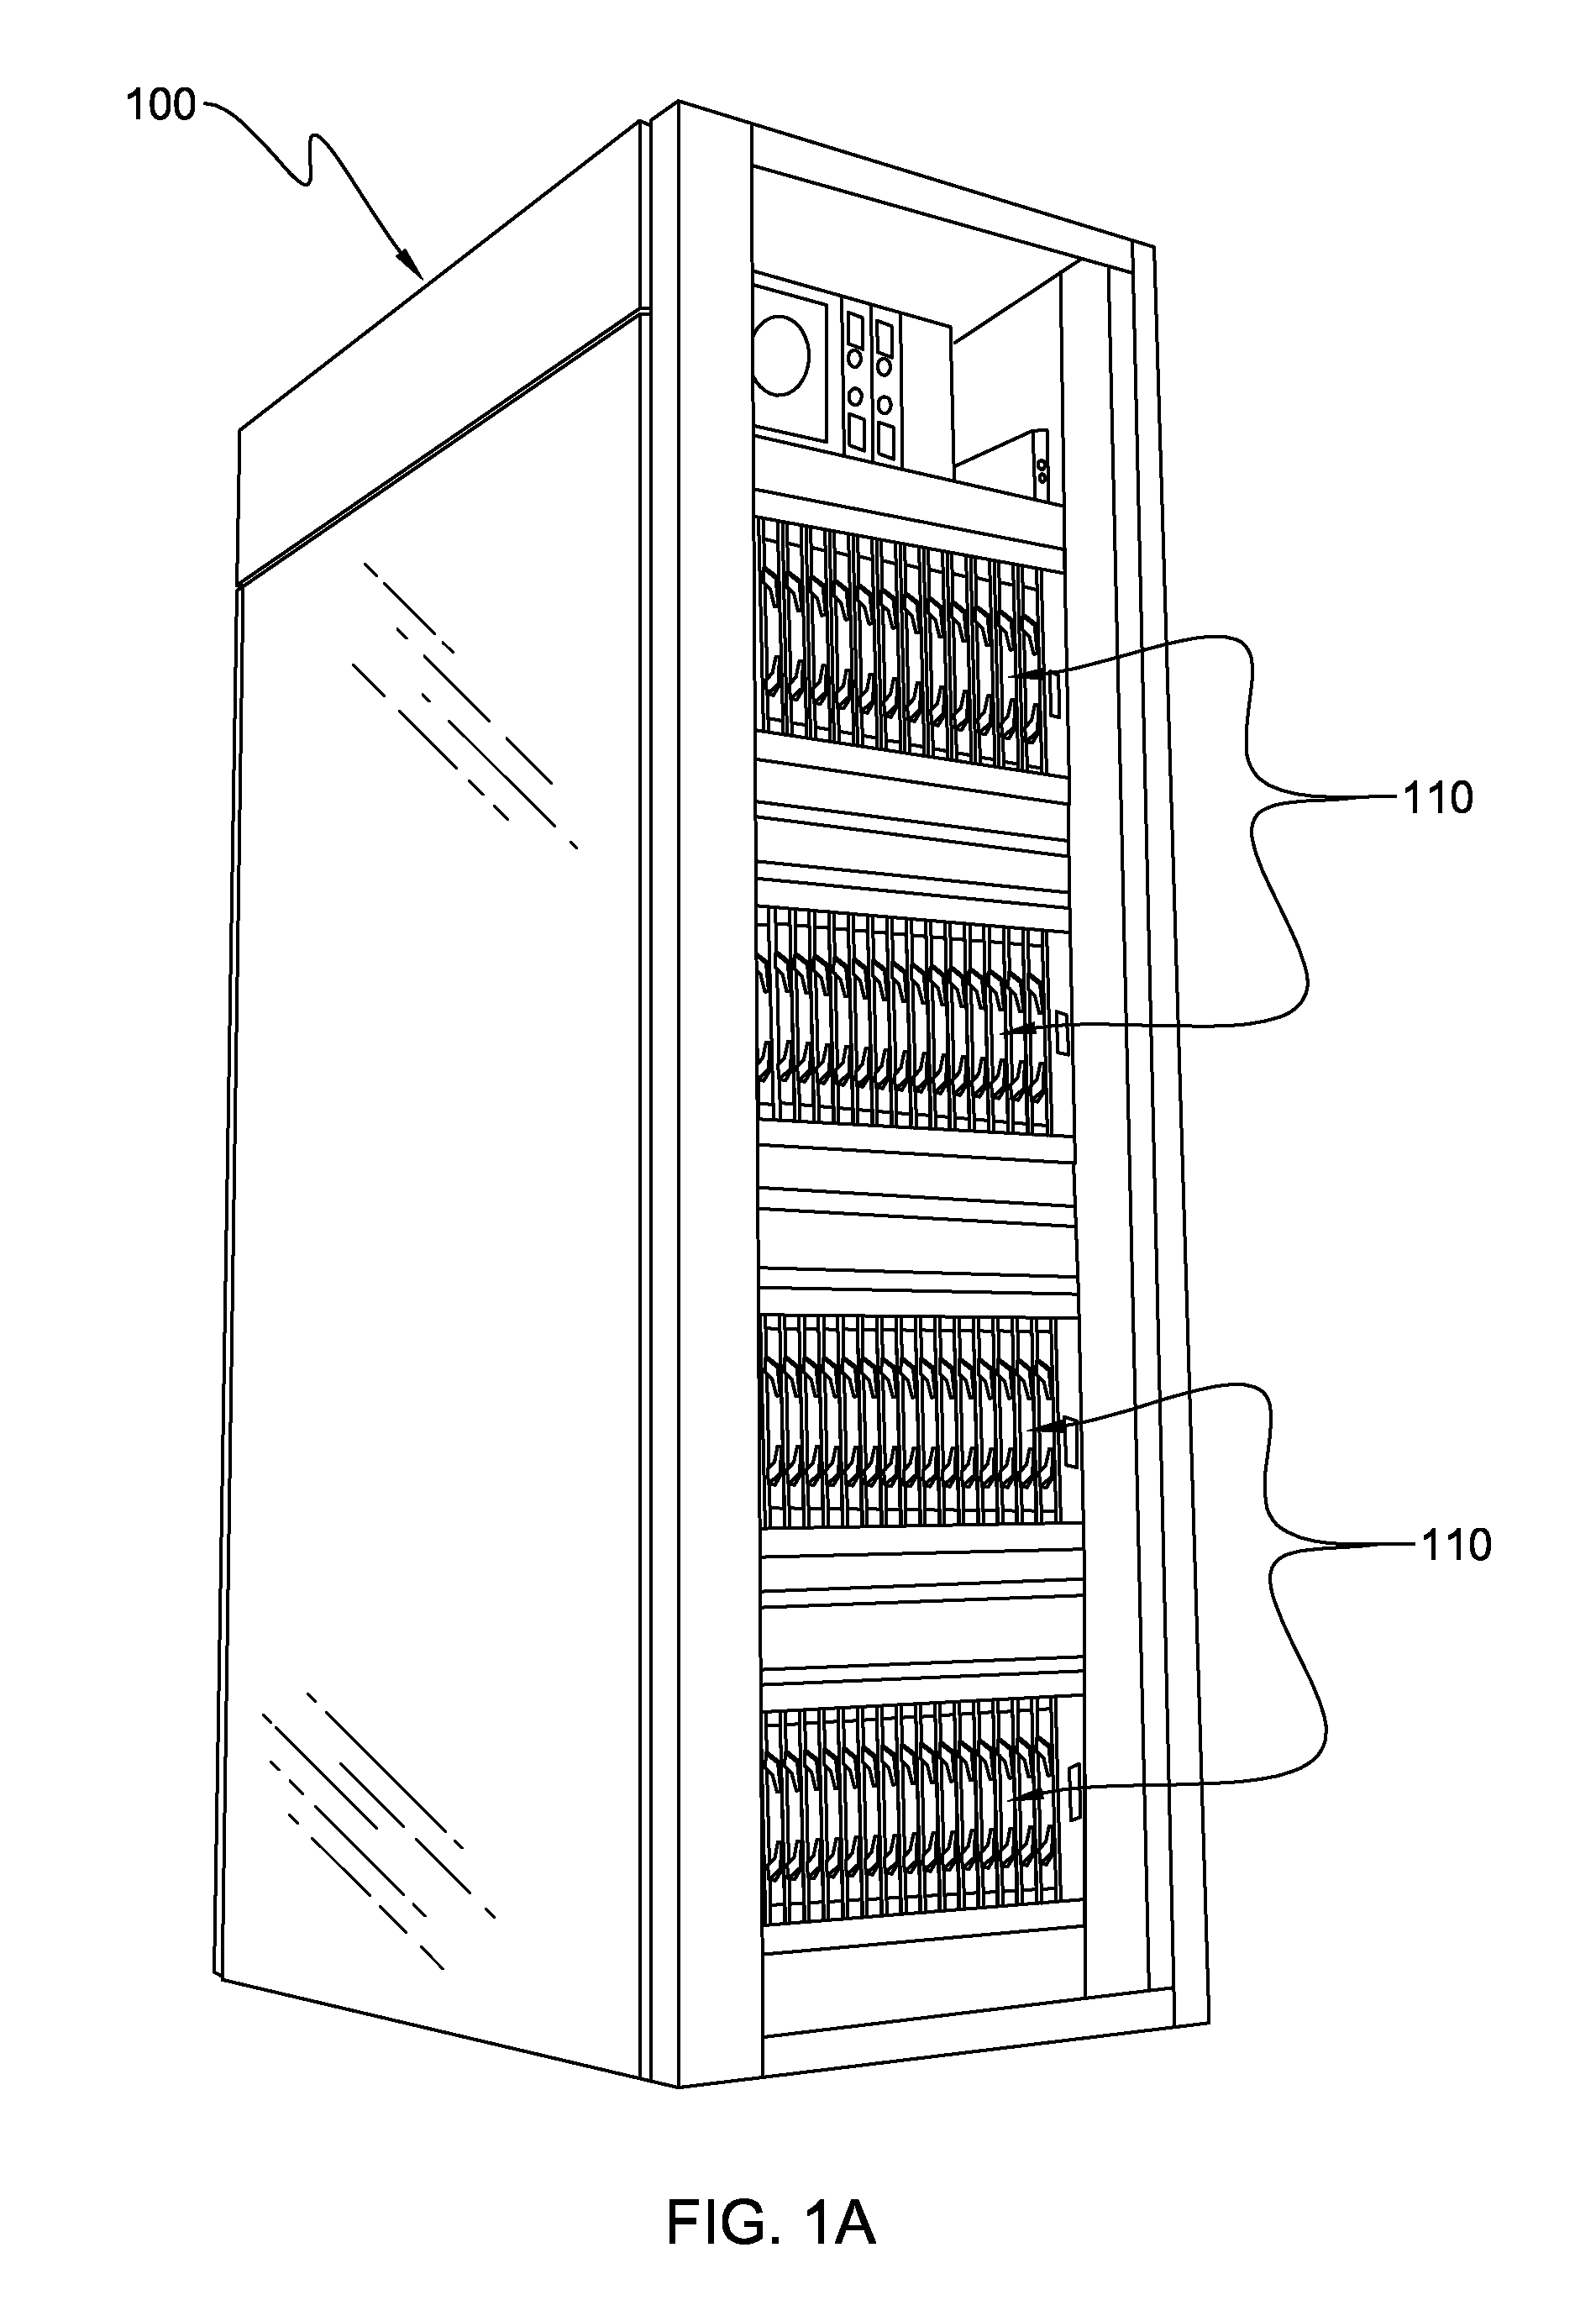 Apparatus and method for facilitating pumped immersion-cooling of an electronic subsystem